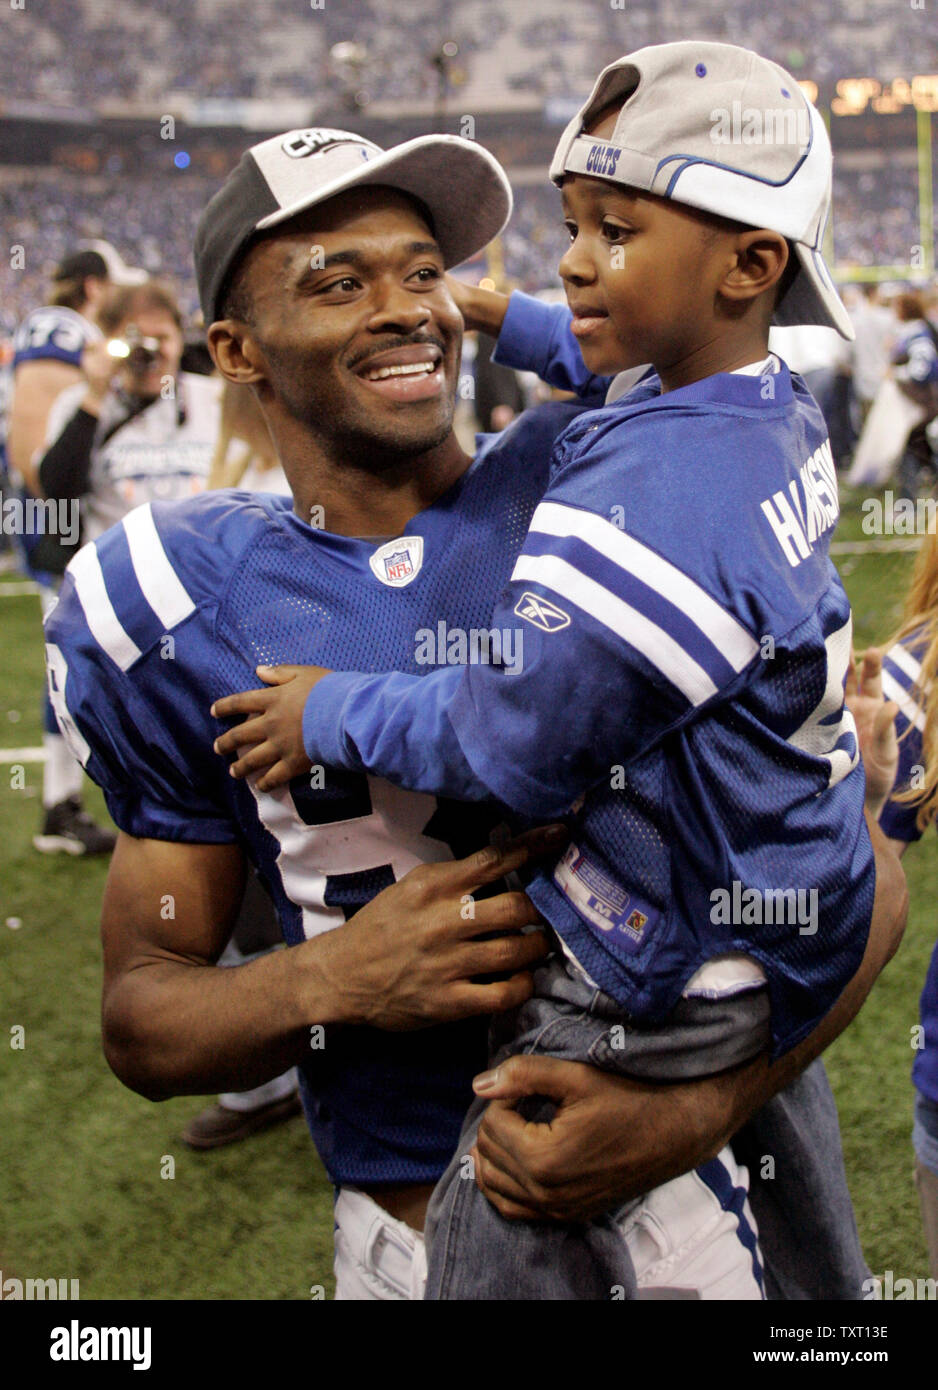 indianapolis-colts-wide-receiver-marvin-harrison-88-holds-his-son-after-the-colts-defeated-the-new-england-patriots-38-34-in-the-afc-championship-game-at-the-rca-dome-in-indianapolis-on-january-21-2007-upi-phototom-strattman-TXT13E.jpg